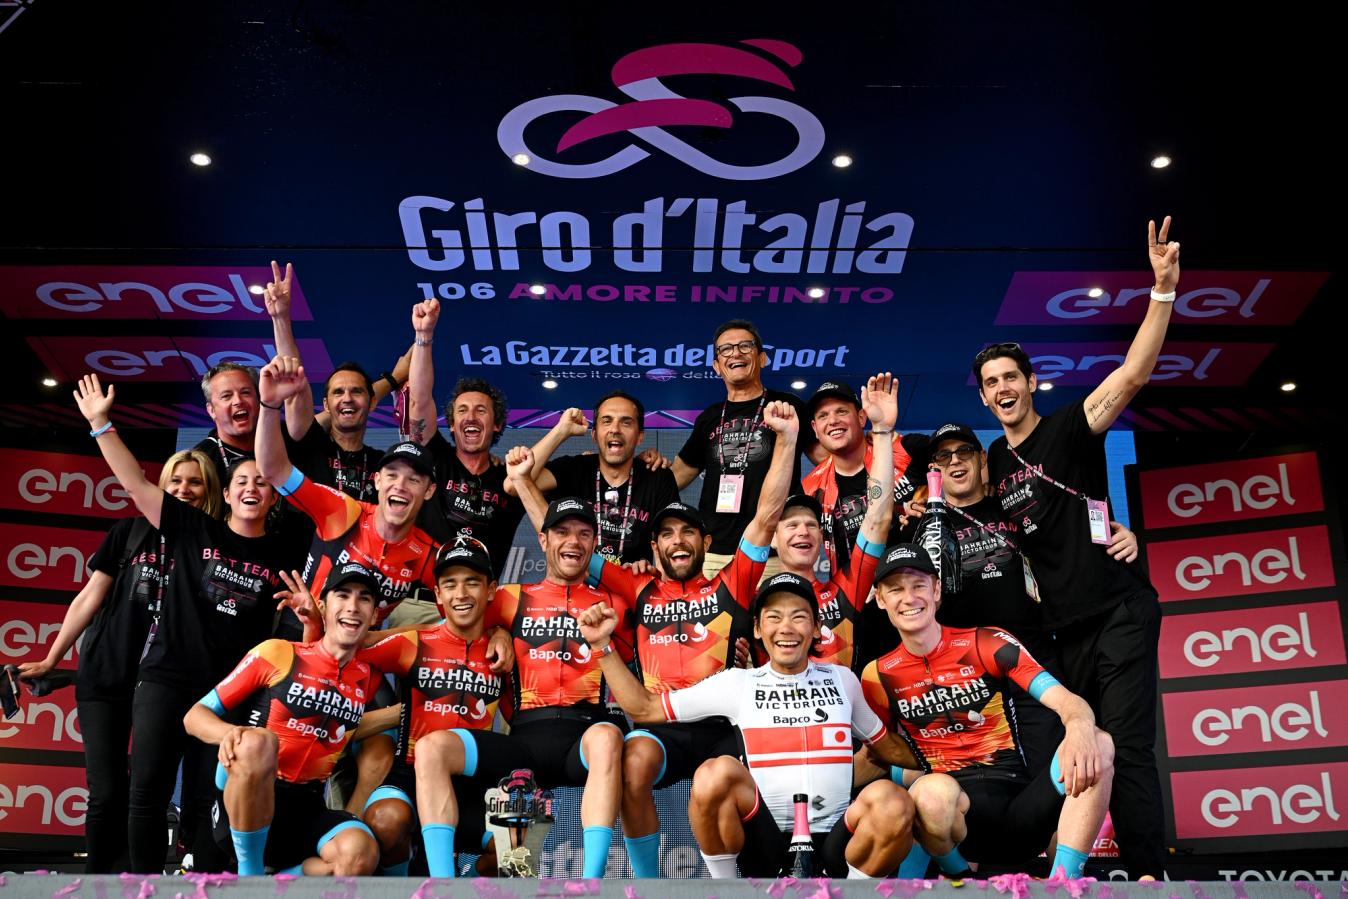 Haig and his team celebrating the win of the team competition at the 2023 Giro d'Italia